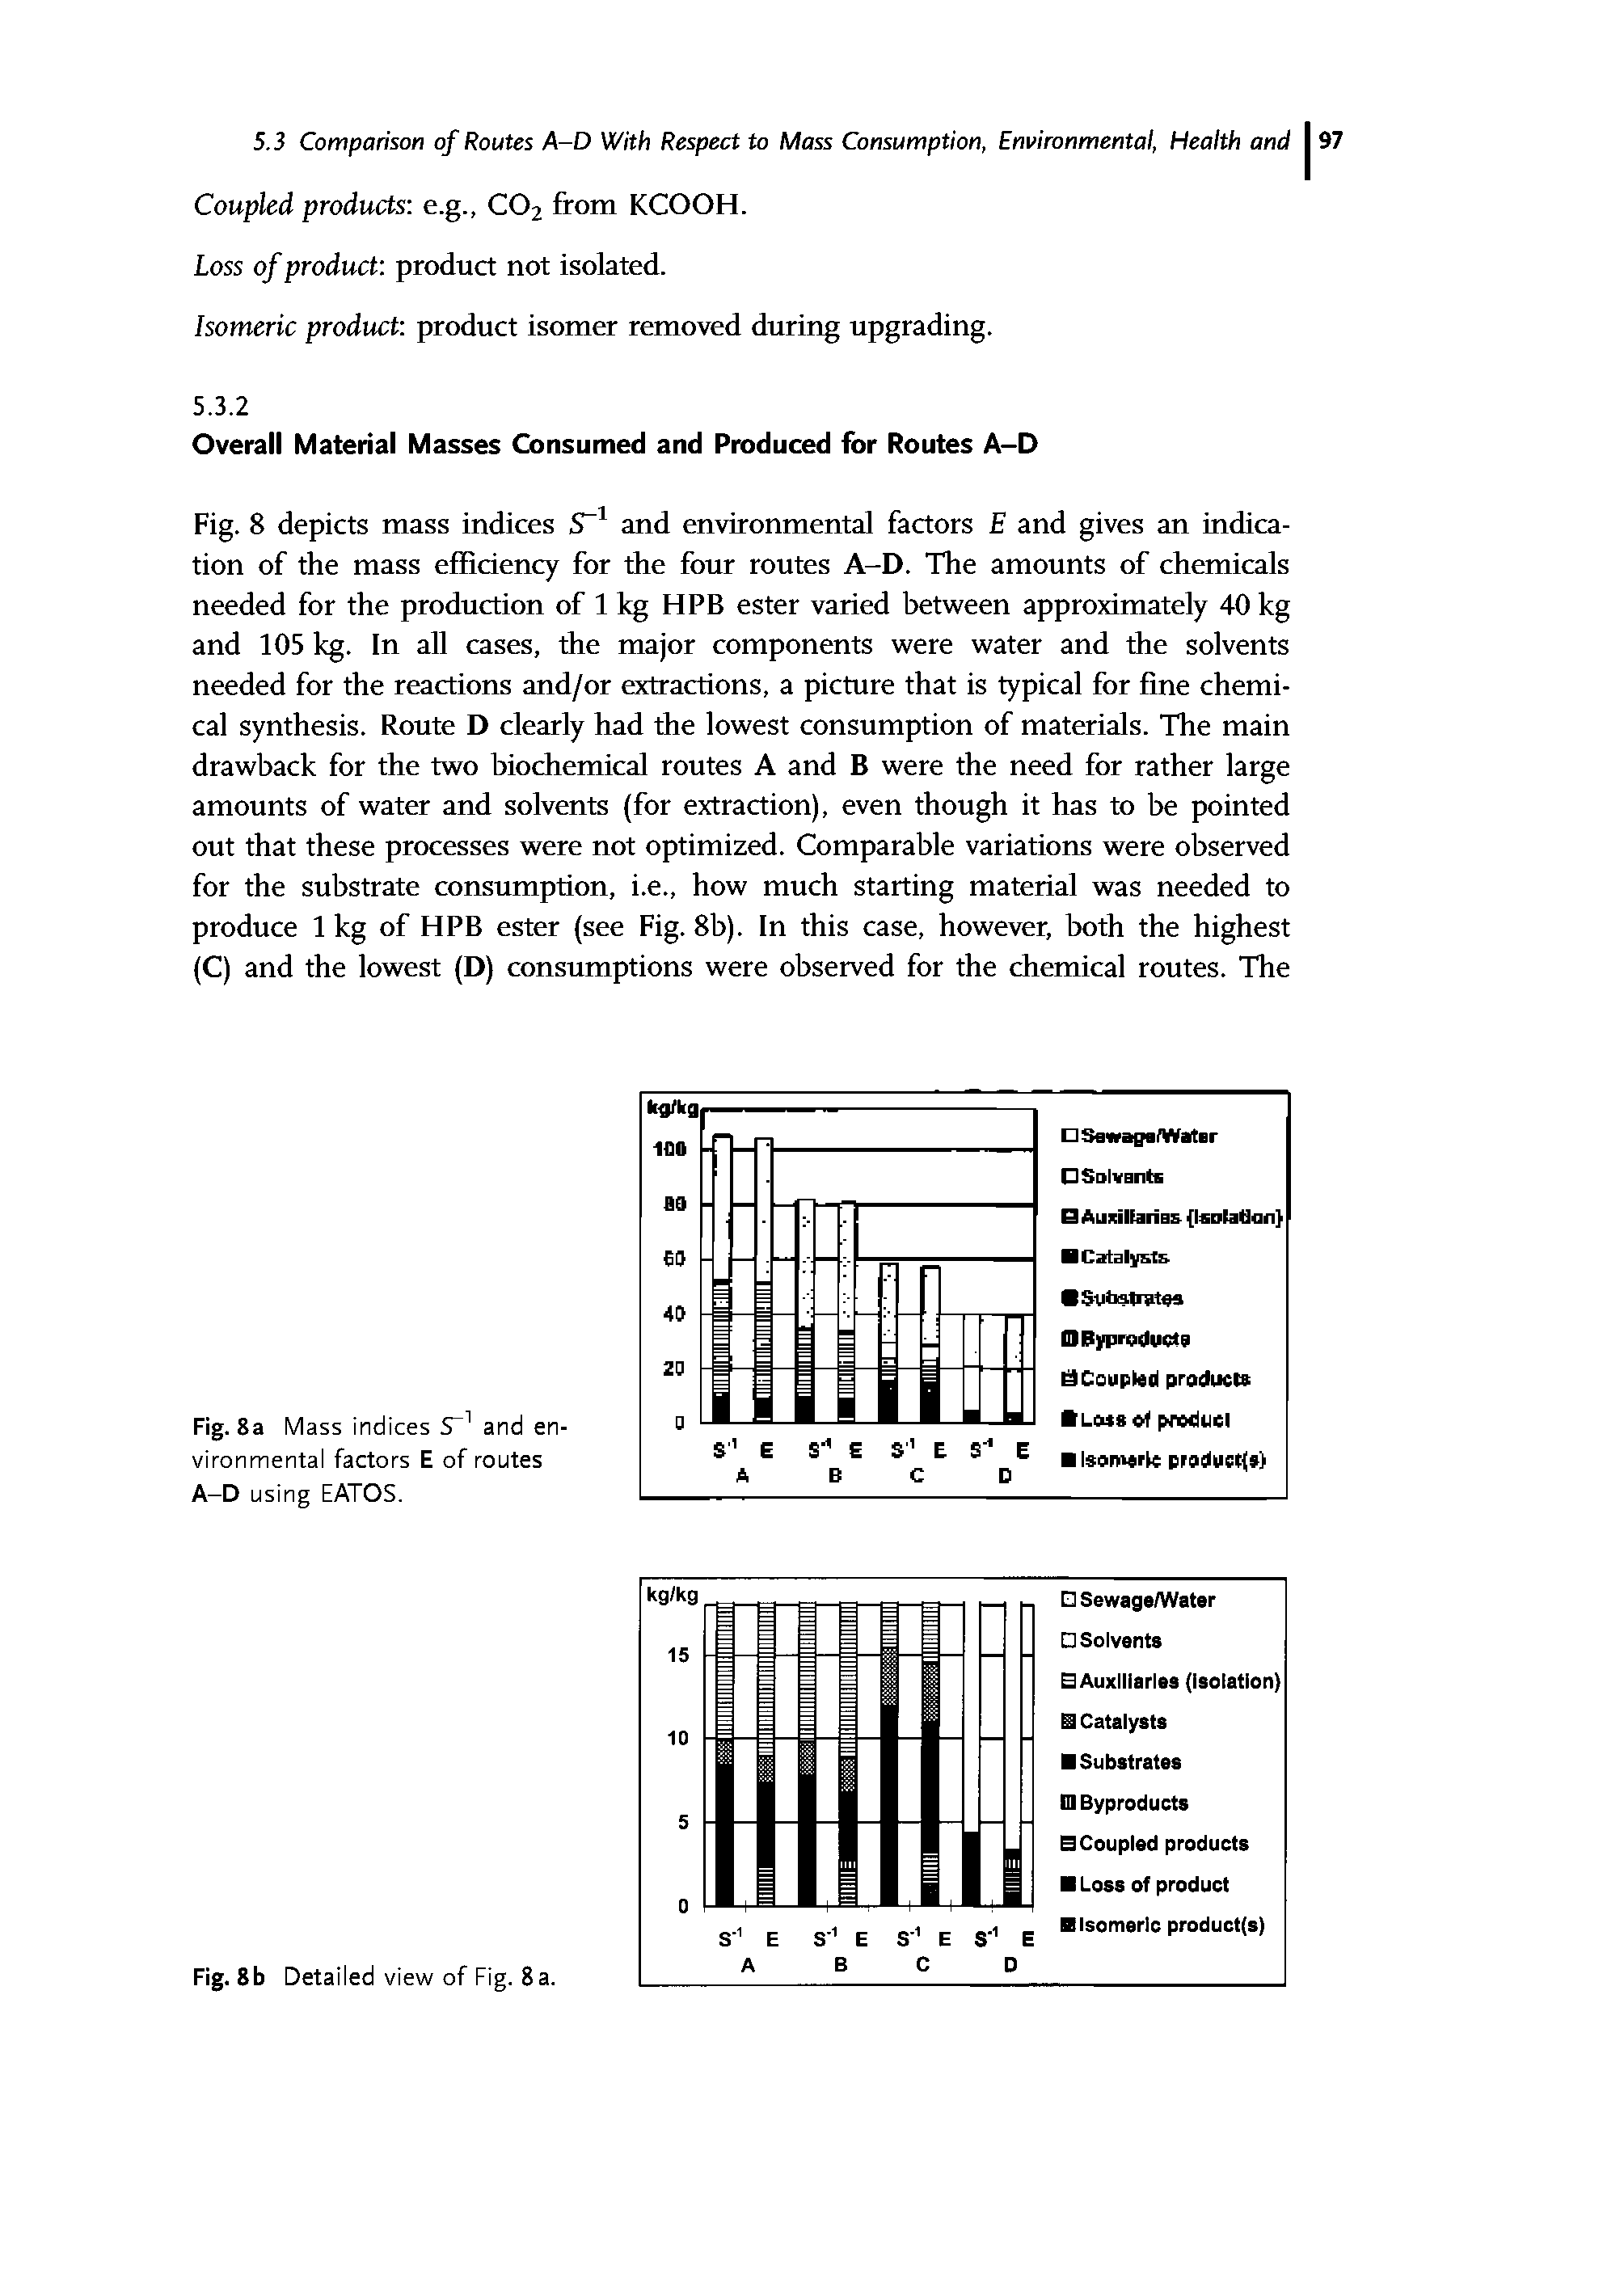 Fig. 8 depicts mass indices S-1 and environmental factors E and gives an indication of the mass efficiency for the four routes A-D. The amounts of chemicals needed for the production of 1 kg HPB ester varied between approximately 40 kg and 105 kg. In all cases, the major components were water and the solvents needed for the reactions and/or extractions, a picture that is typical for fine chemical synthesis. Route D clearly had the lowest consumption of materials. The main drawback for the two biochemical routes A and B were the need for rather large amounts of water and solvents (for extraction), even though it has to be pointed out that these processes were not optimized. Comparable variations were observed for the substrate consumption, i.e., how much starting material was needed to produce 1 kg of HPB ester (see Fig. 8b). In this case, however, both the highest (C) and the lowest (D) consumptions were observed for the chemical routes. The...